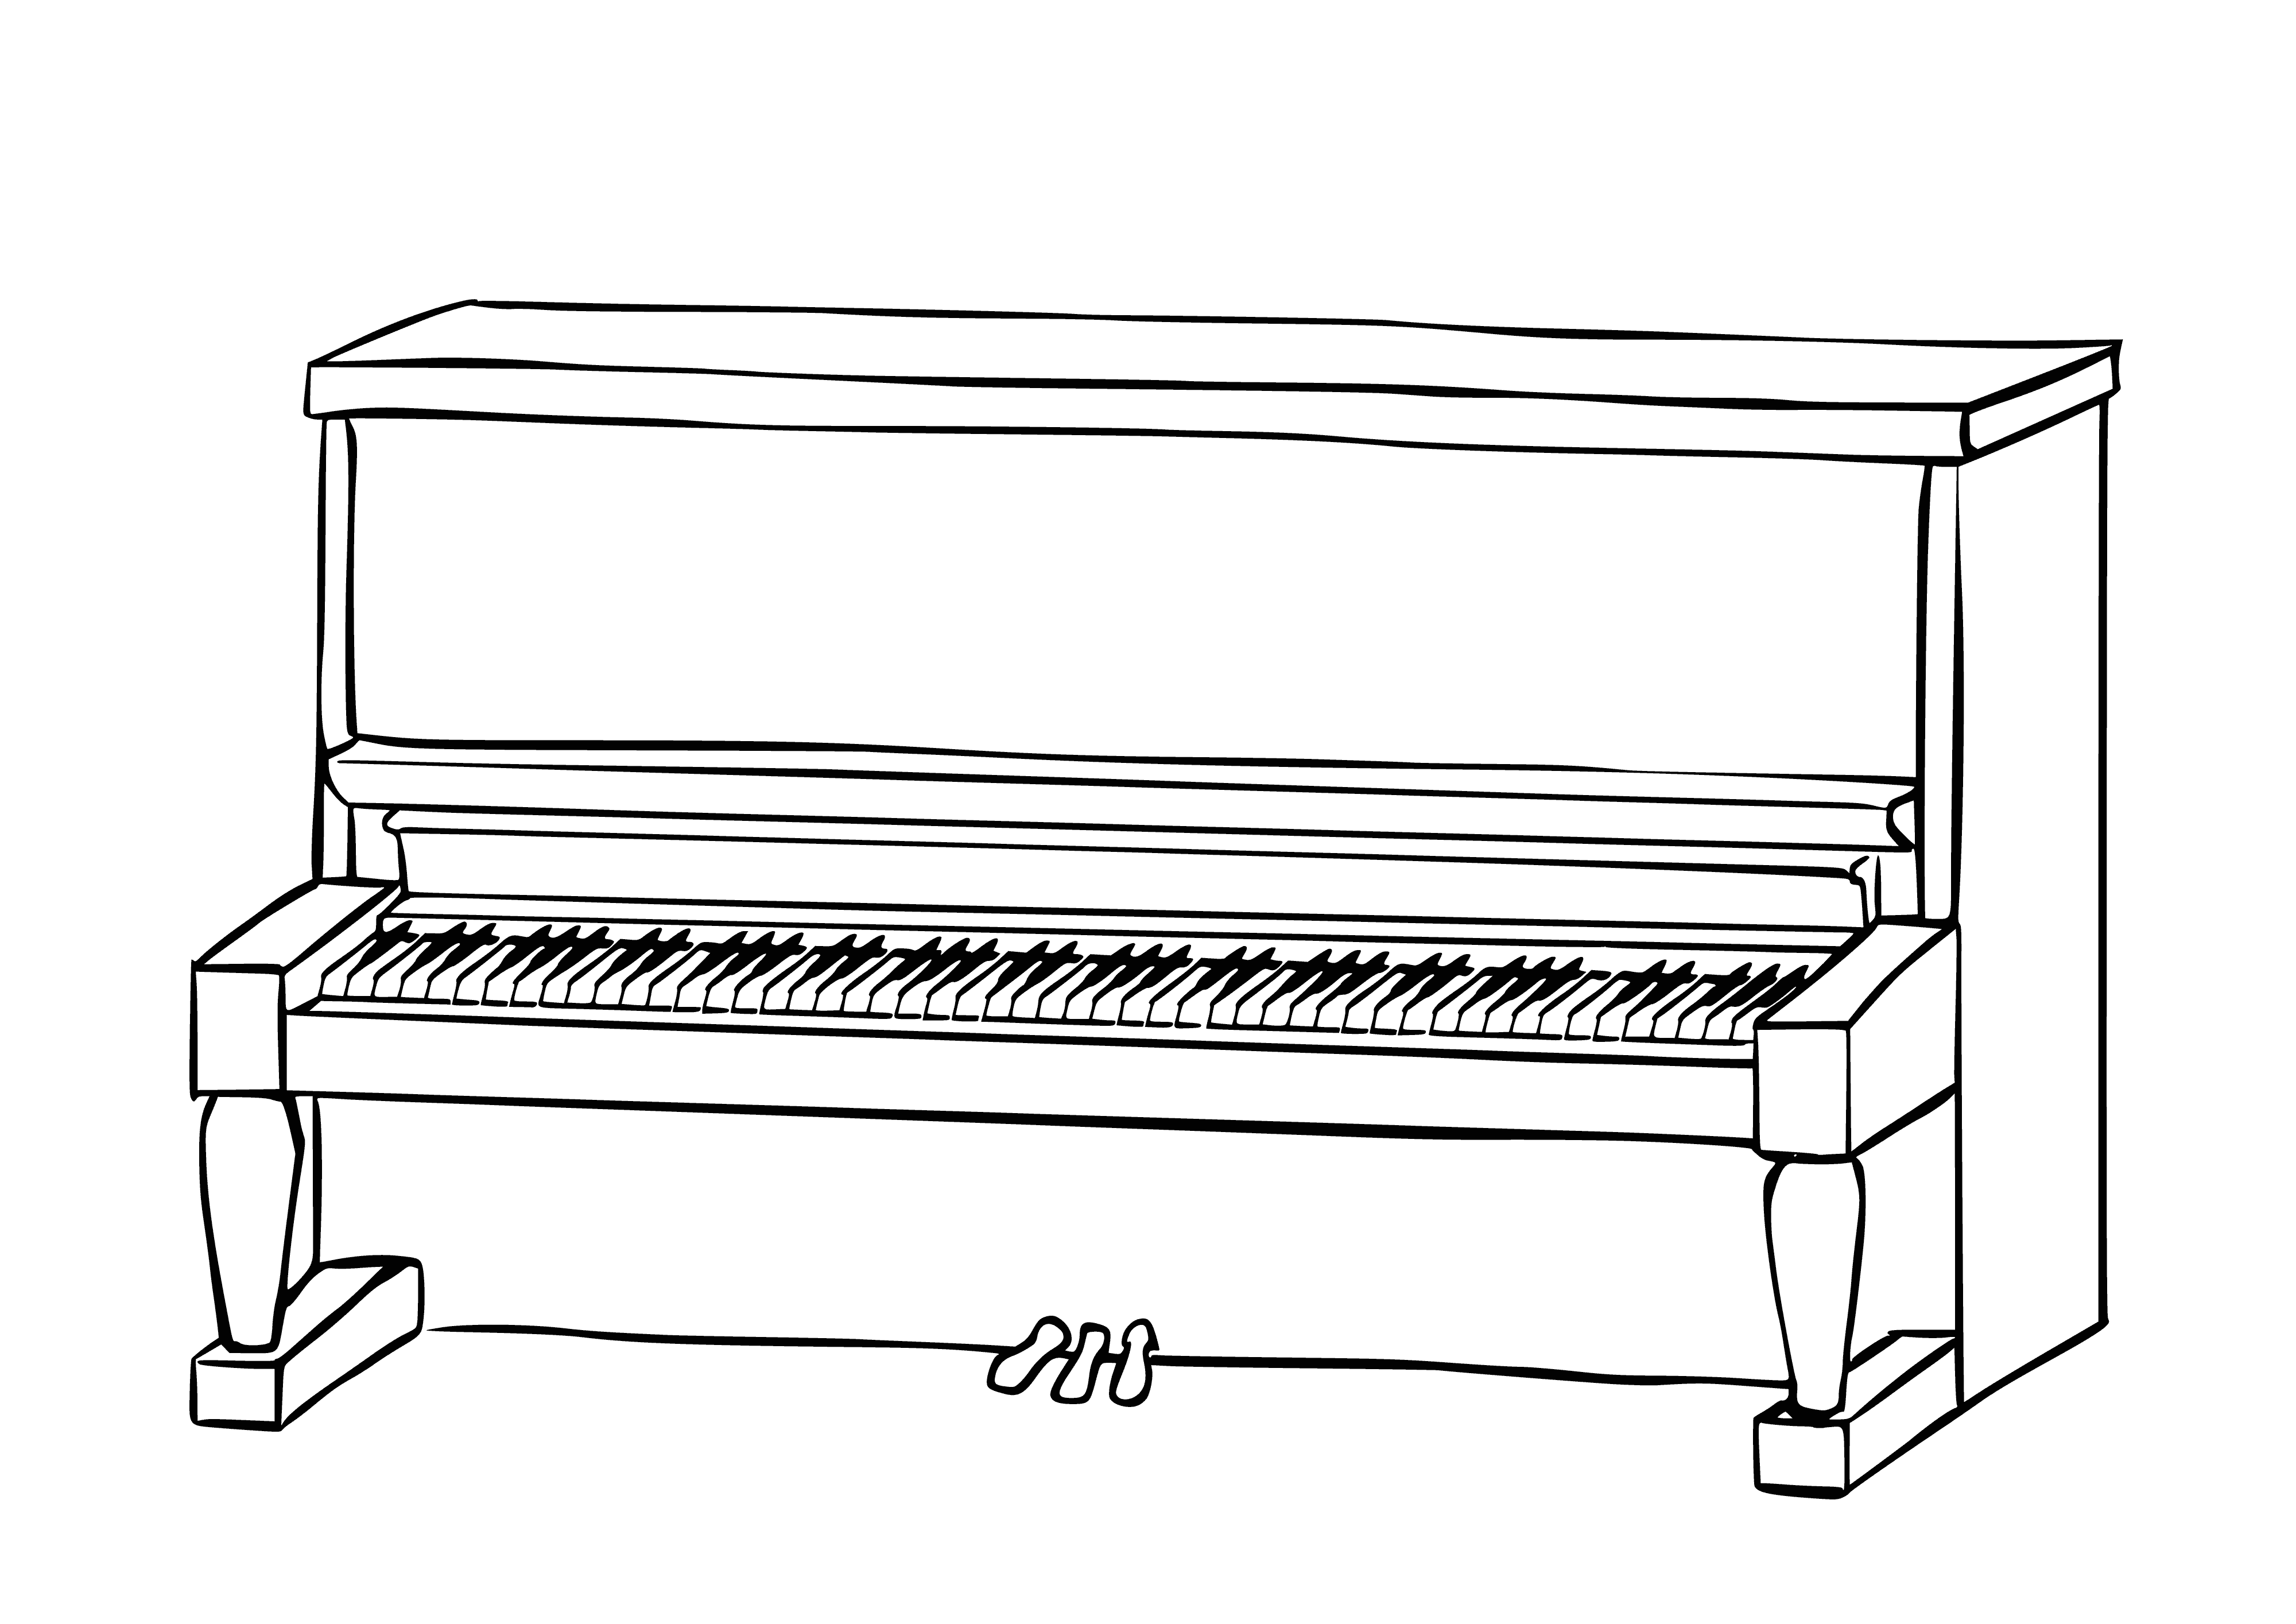 coloring page: Playing piano produces a wide range of sounds, from soft and quiet to loud & powerful; operated by pressing key-sized levers with the fingers.